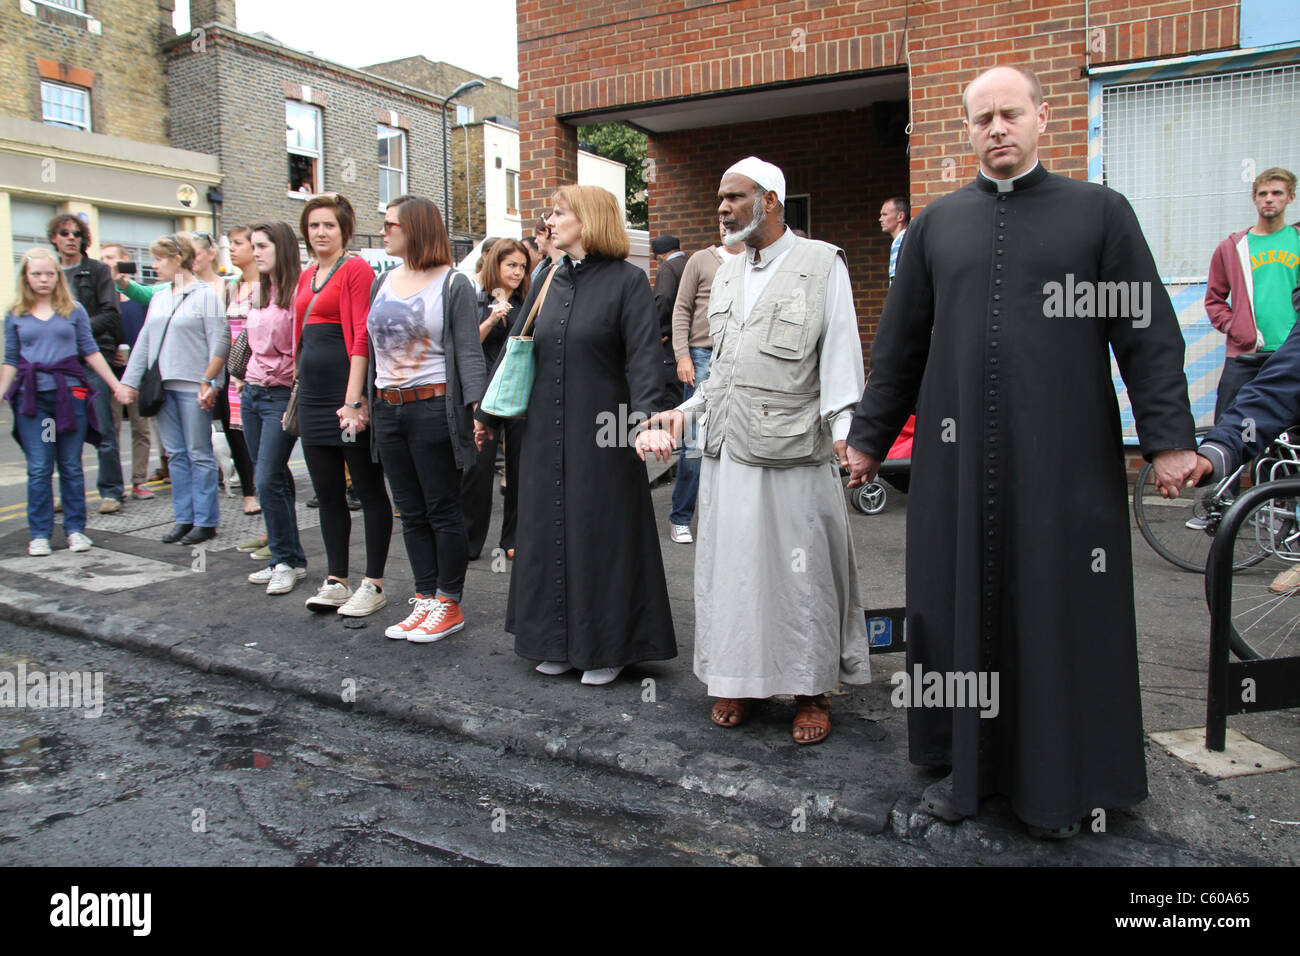 Local community get together to clear damage caused by rioters and looters in Hackney, London.Christian and Muslim leaders pray. Stock Photo